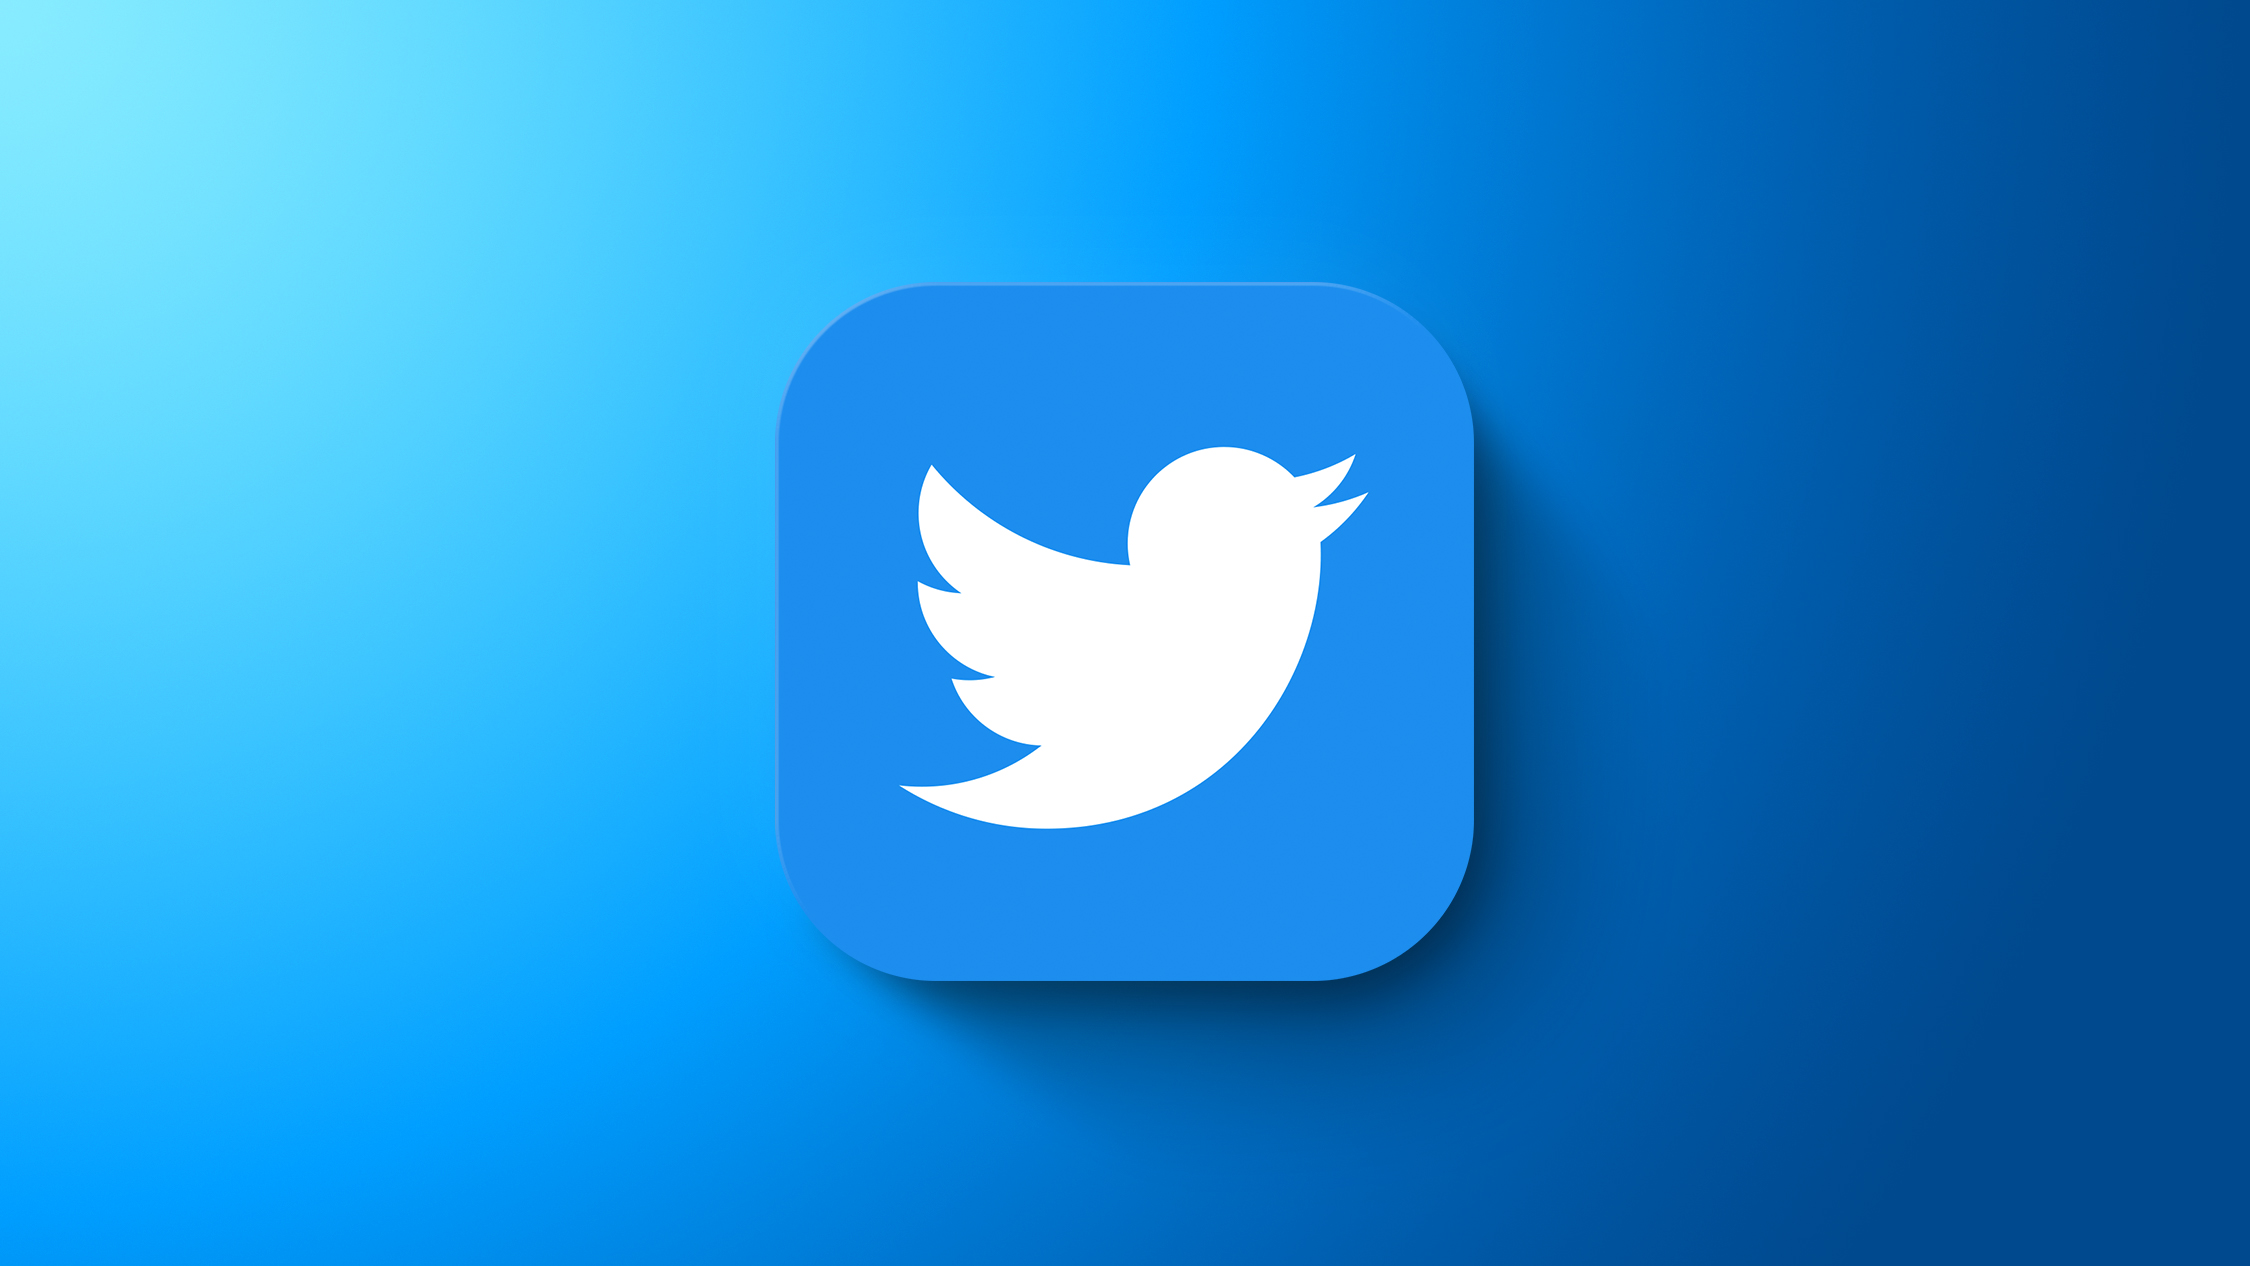 Anyone Can Now Share Twitter Spaces Clips on iOS and Android